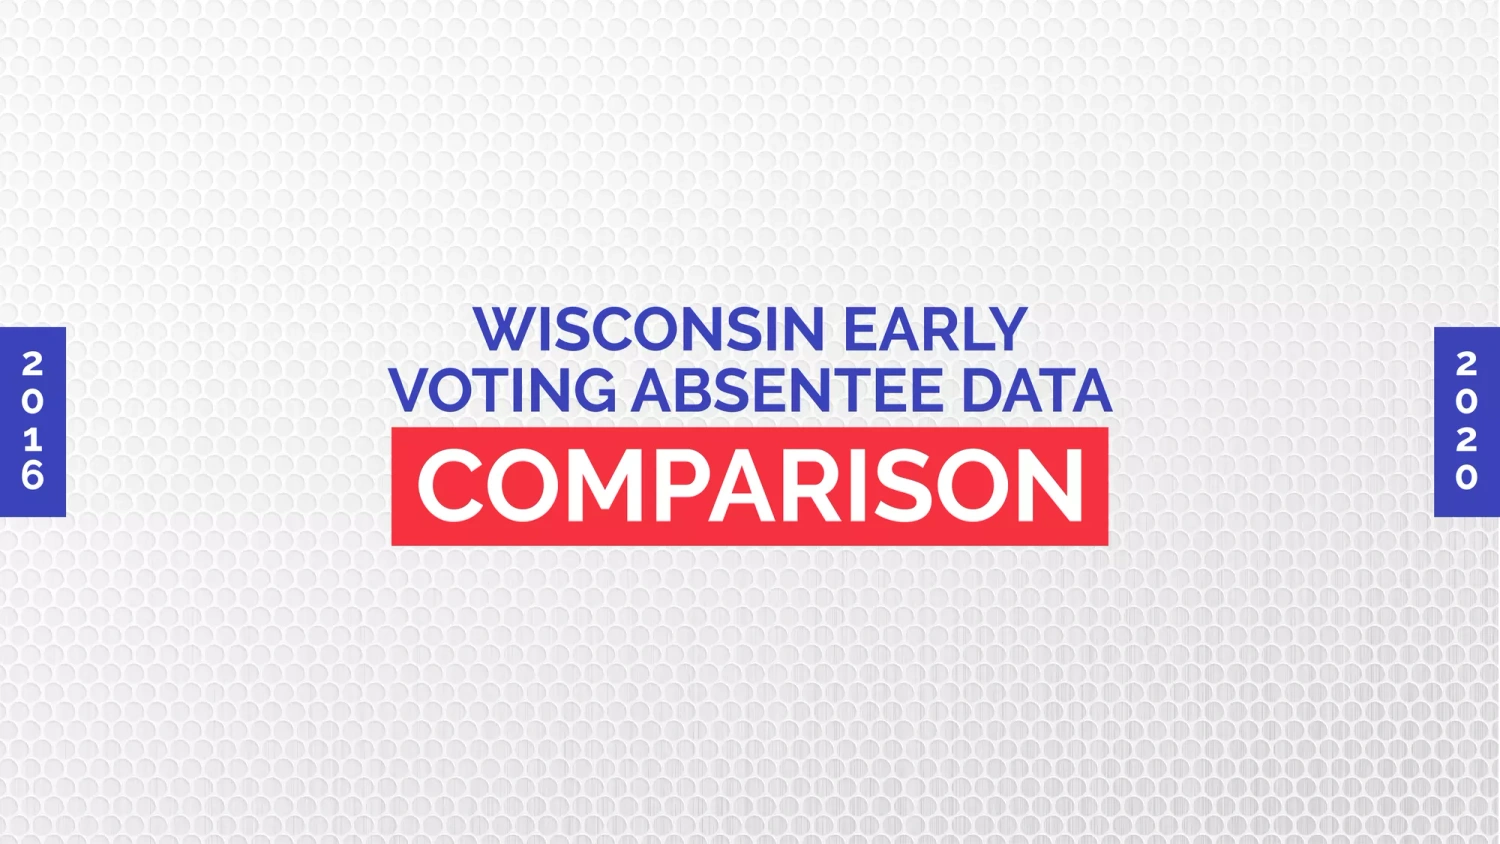 Wisconsin Early Voting Absentee Data on Nov 1st, 2020 as compared to 2000 through 2020 General Election Votes